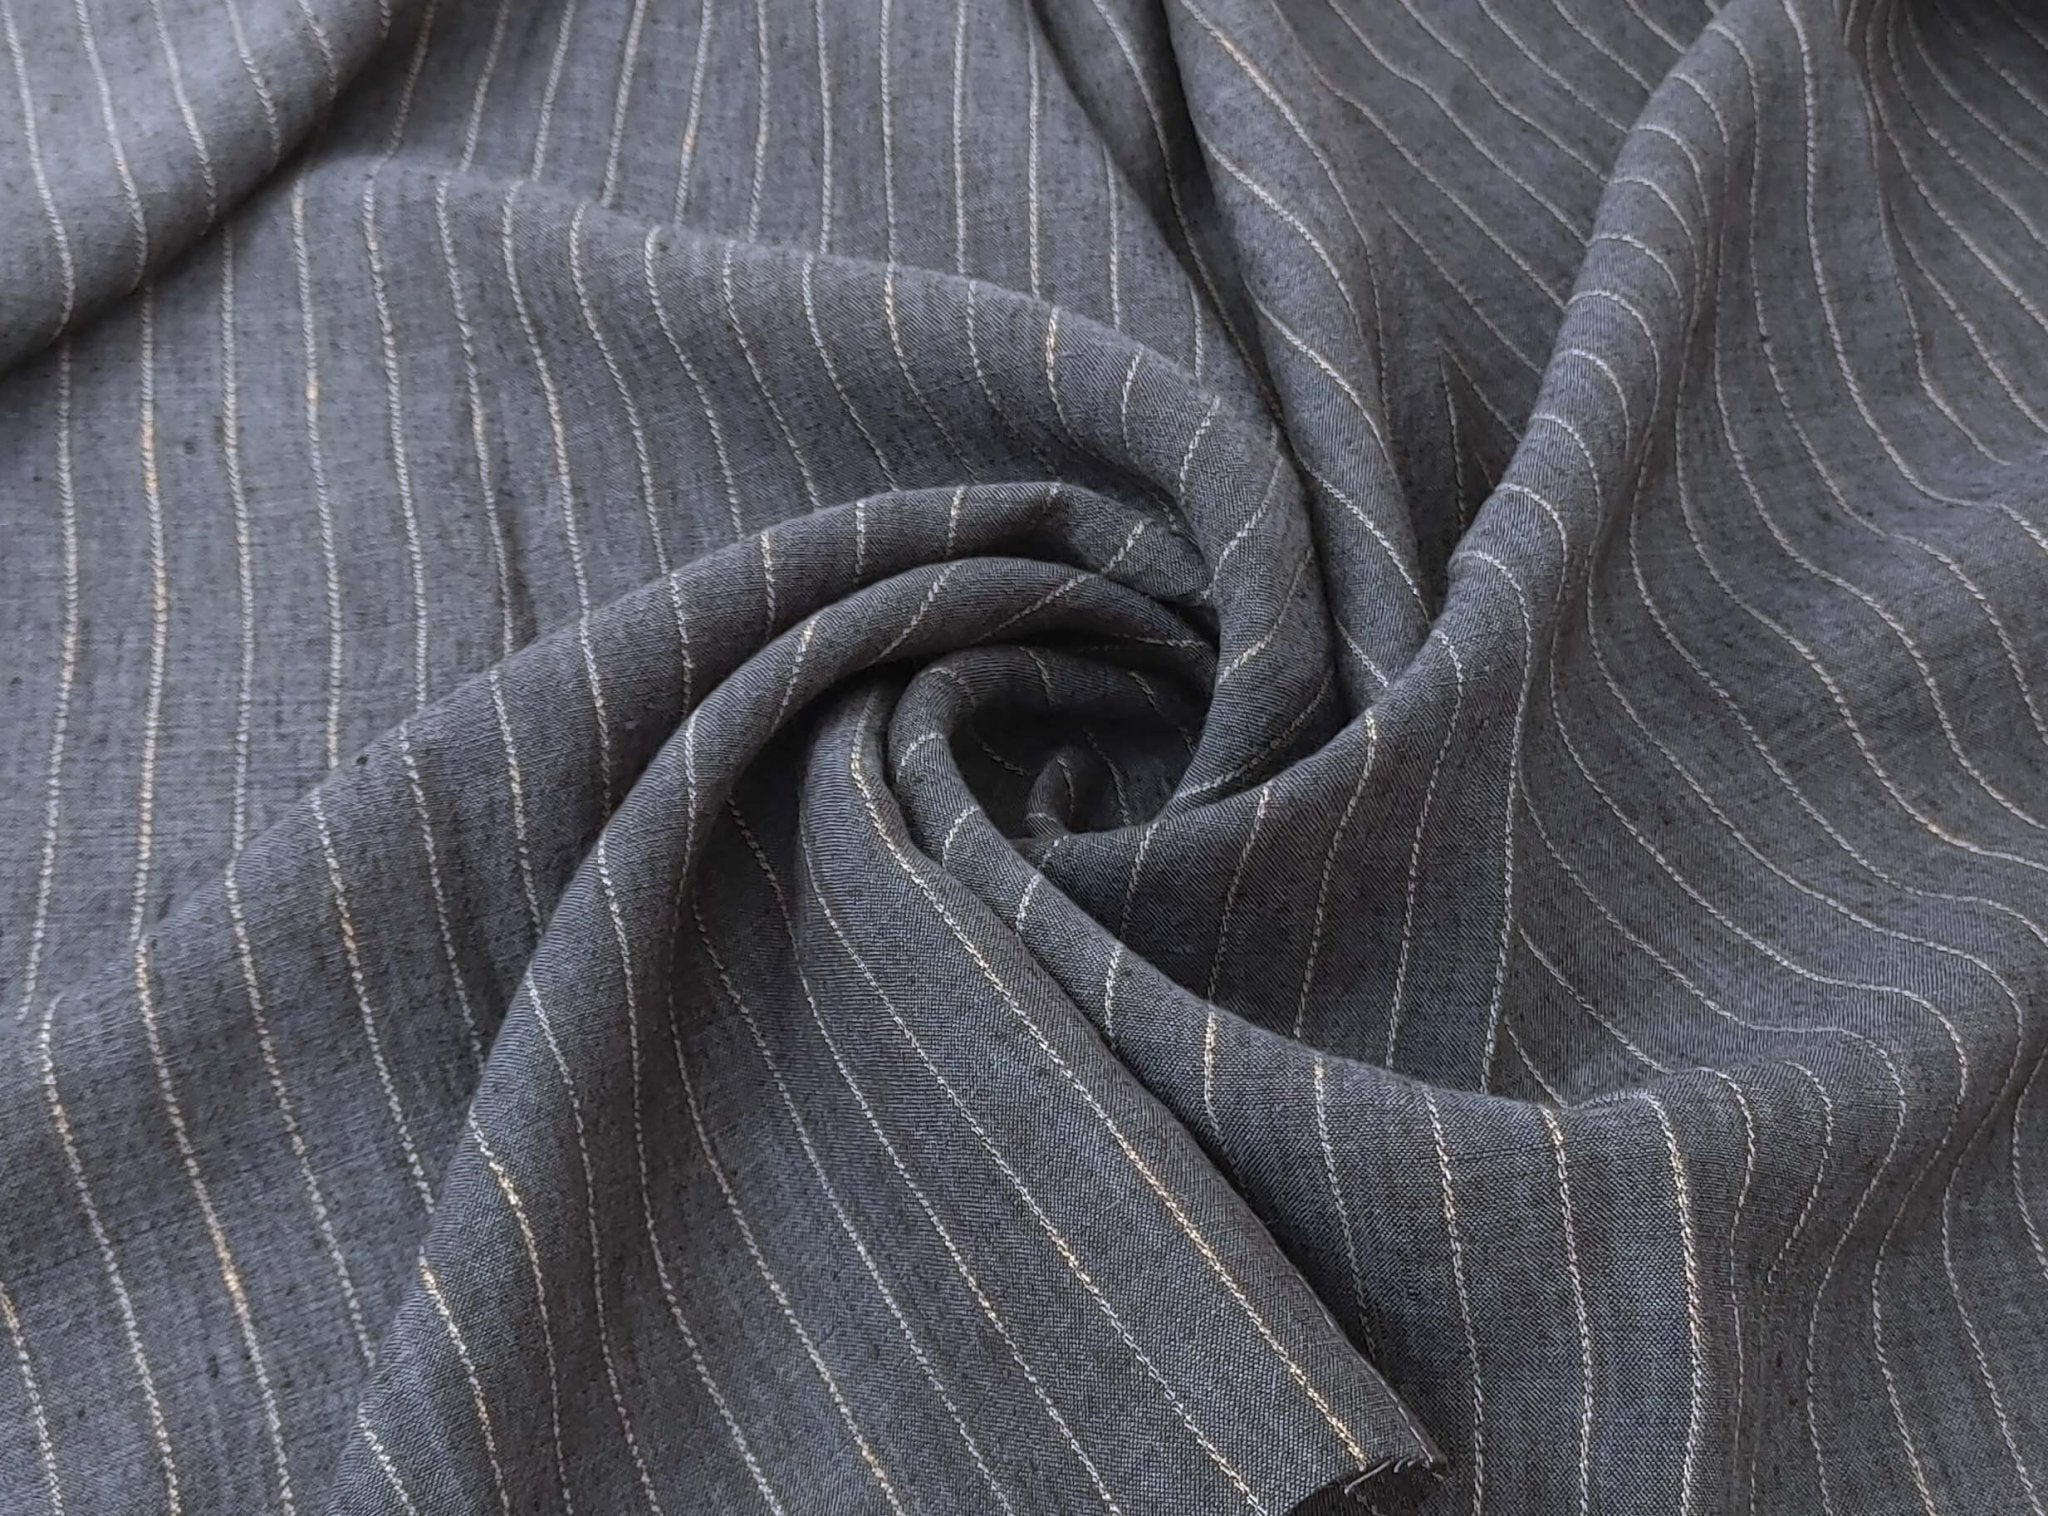 100% Linen Stripe Fabric: Dark Navy with Beige Stripes - Lightweight for Various Projects 7294 - The Linen Lab - Navy